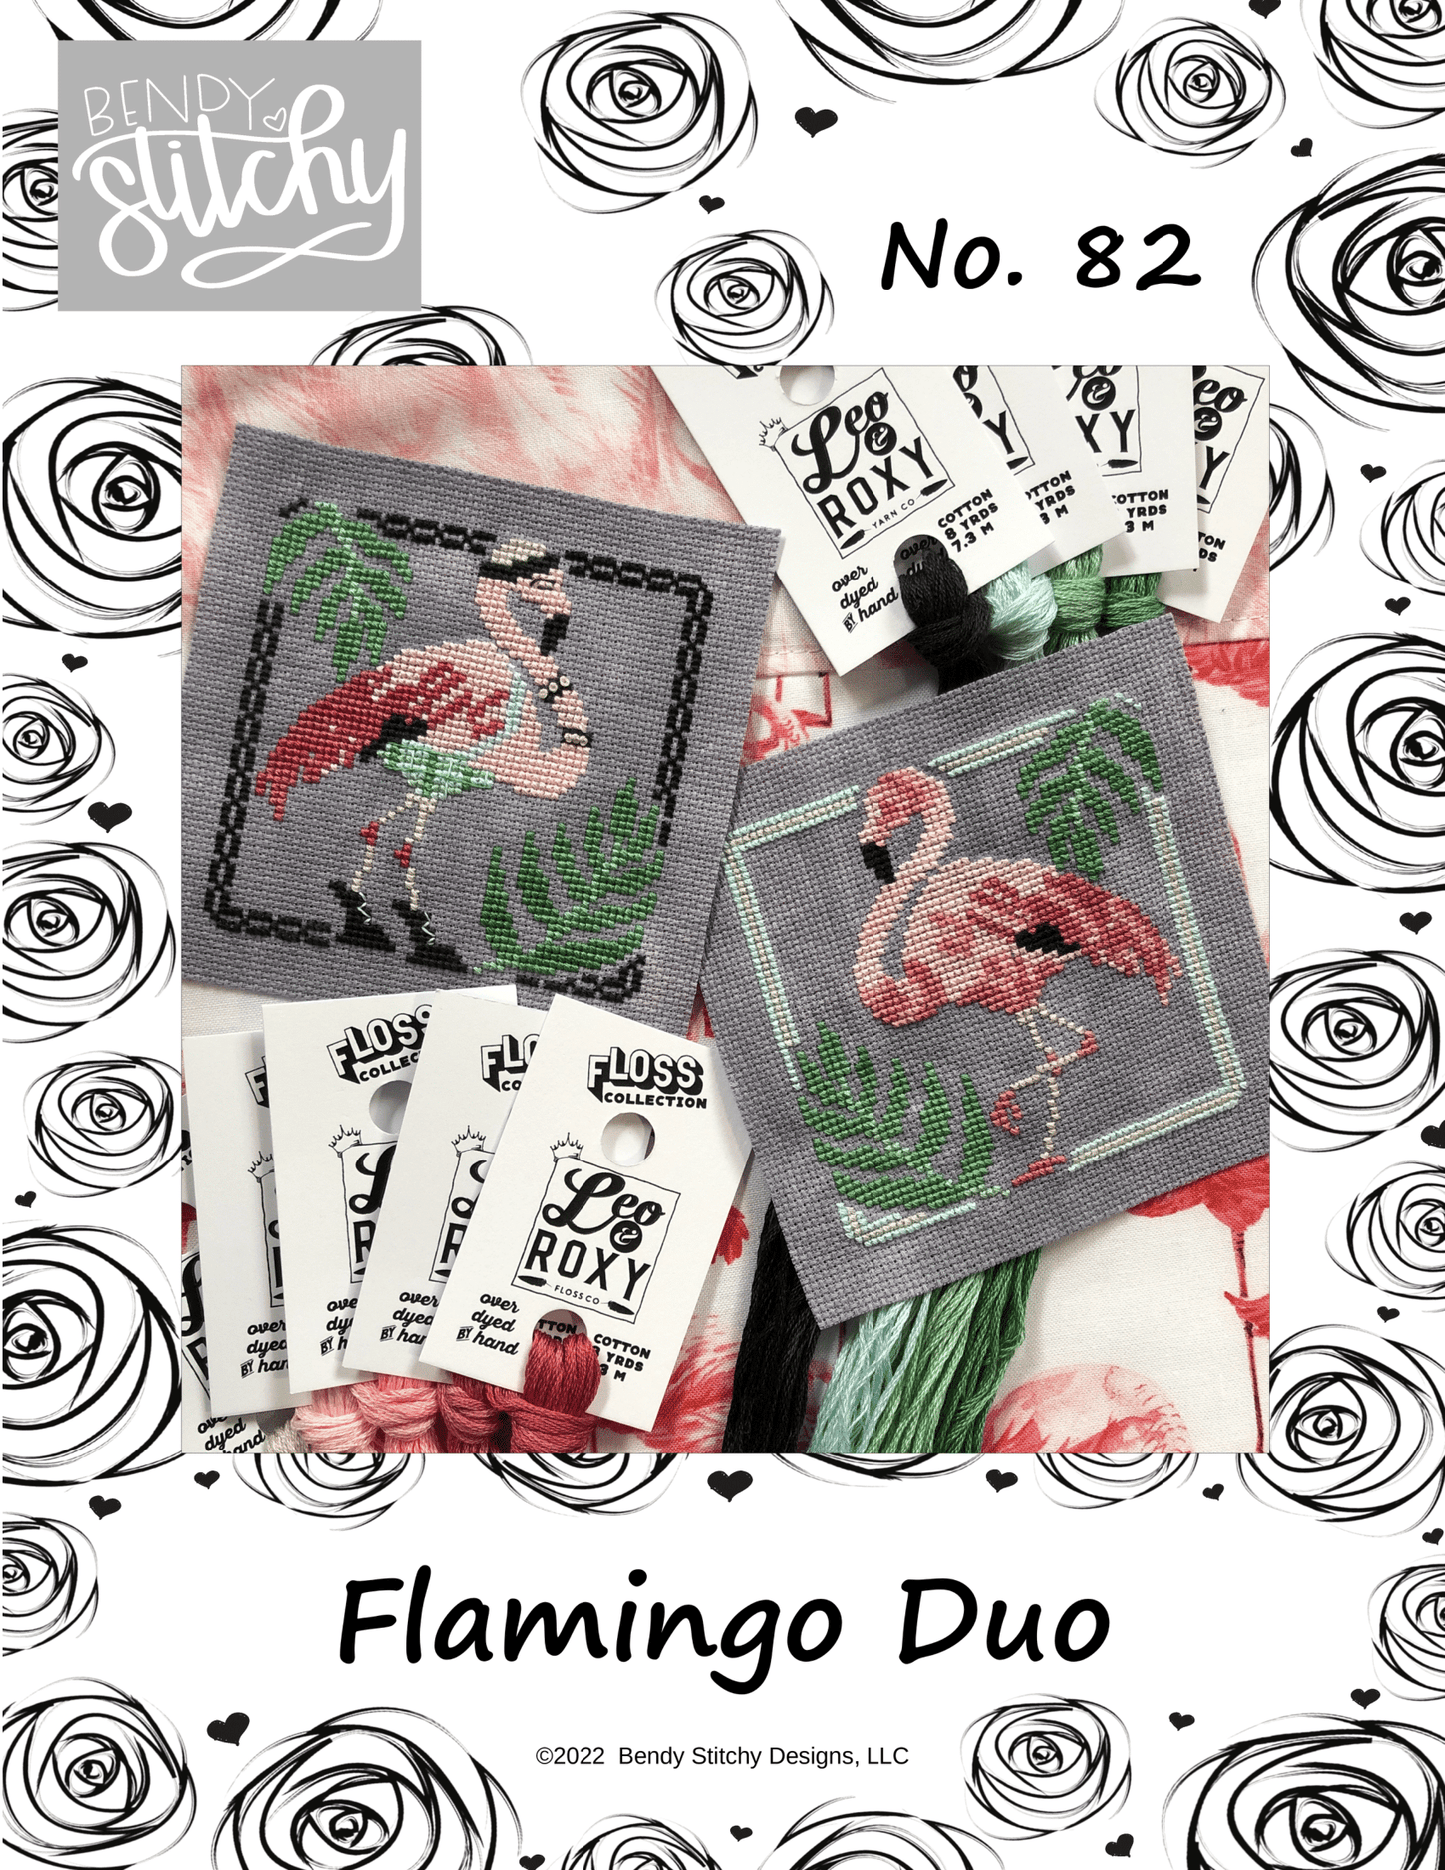 Bendy Stitchy Designs, Roxy Floss Co, and Evertote: Flamingo Duo Full Kit - with Bag Set, PDF Chart, Roxy Floss, and Enamel Needleminder